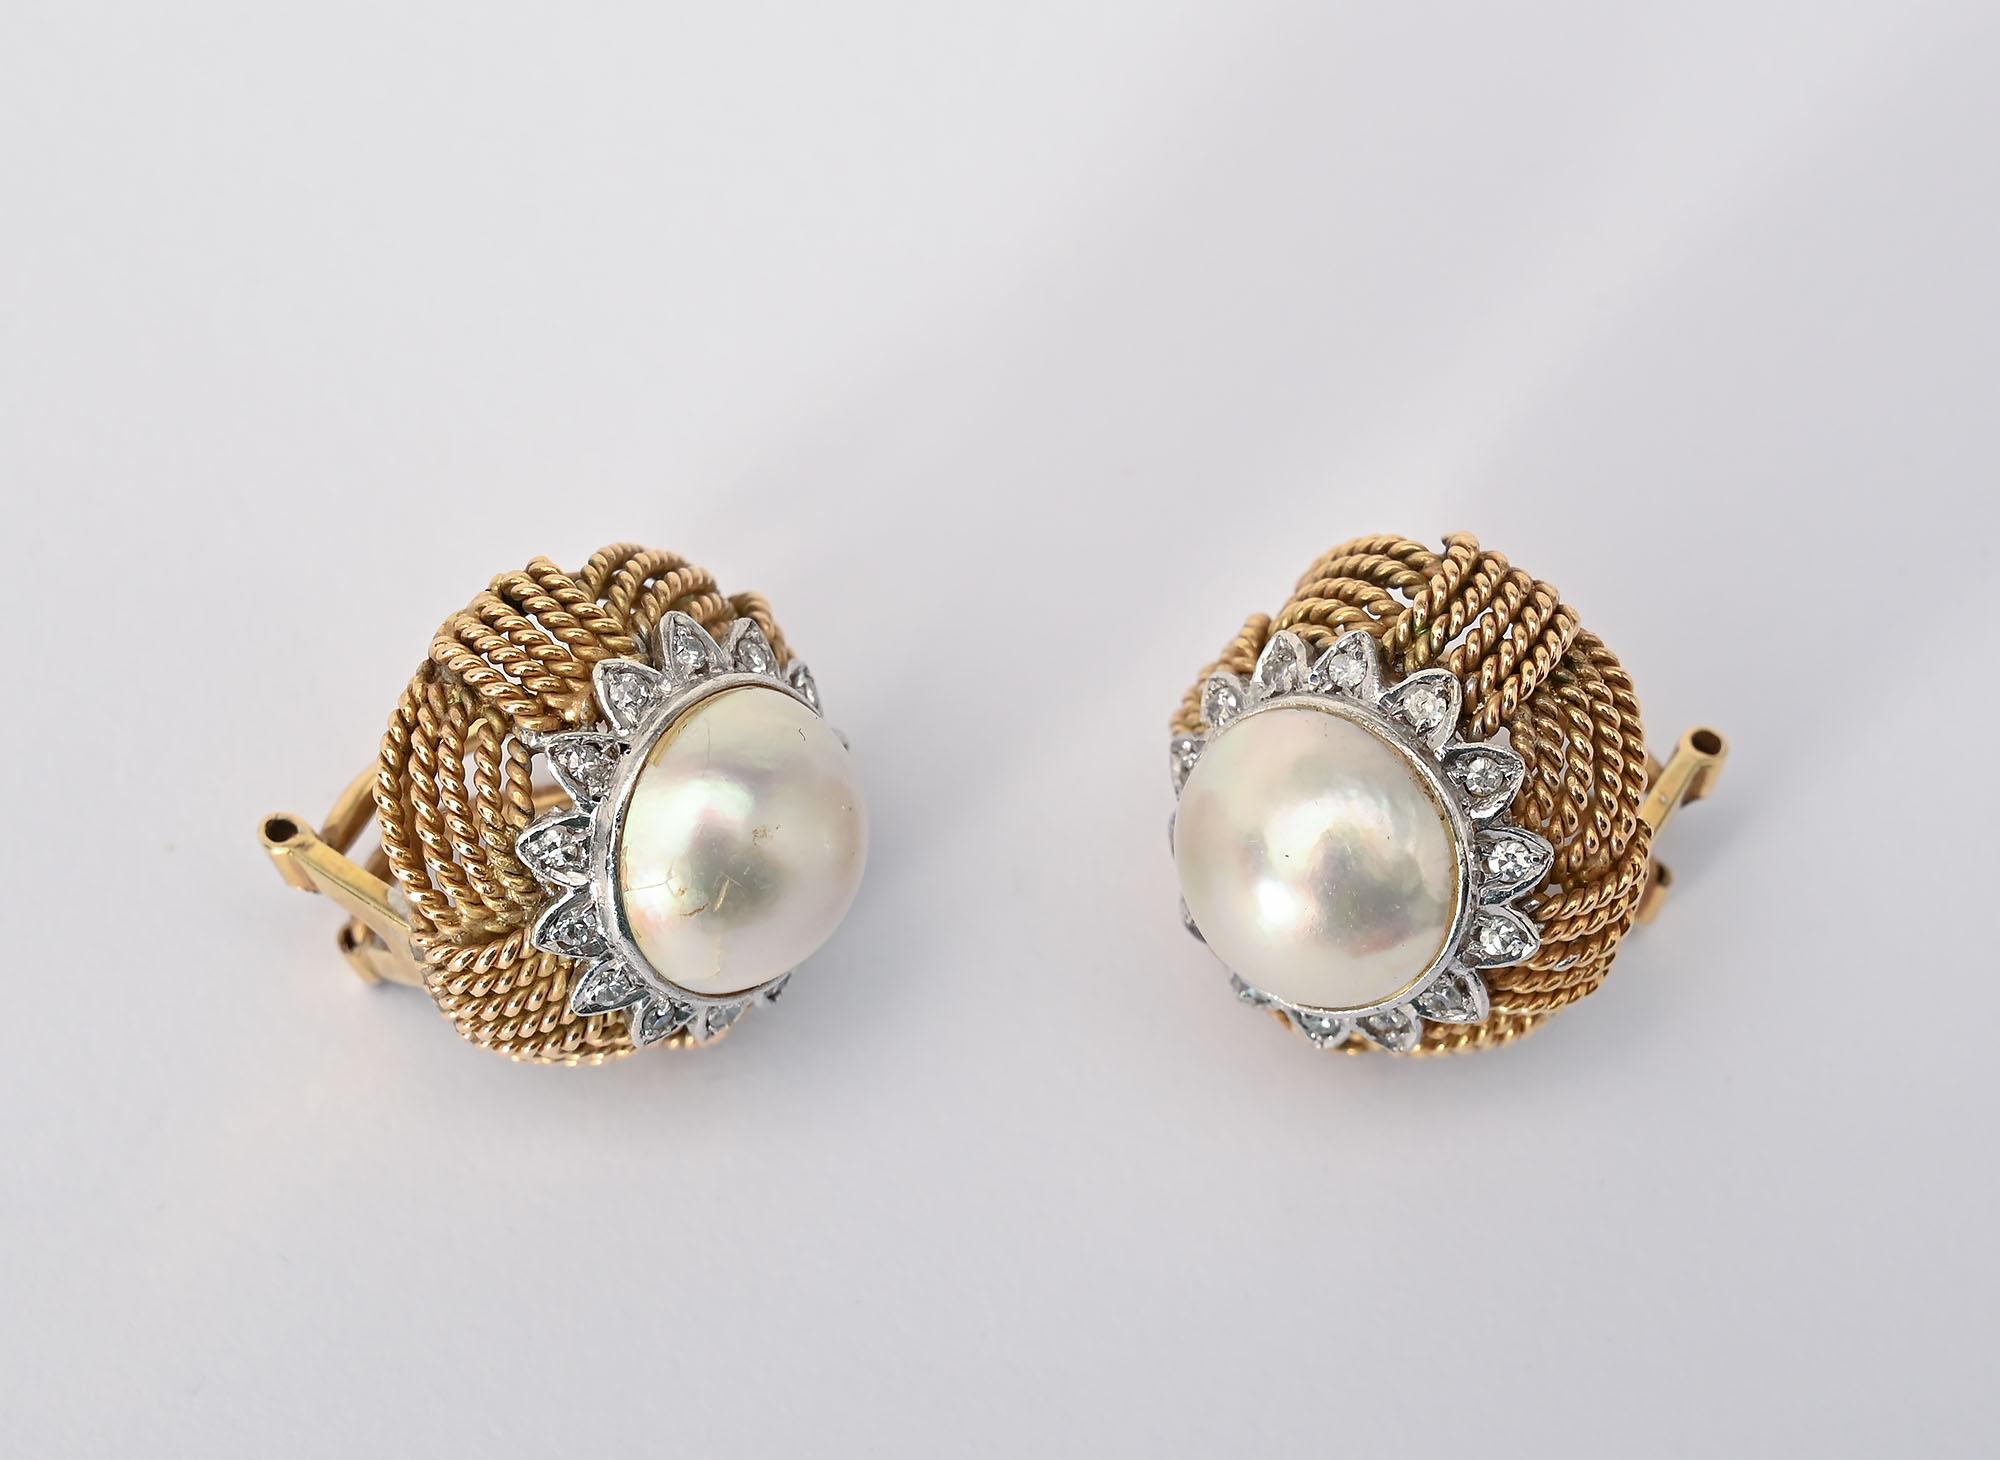 pearl surrounded by diamonds earrings